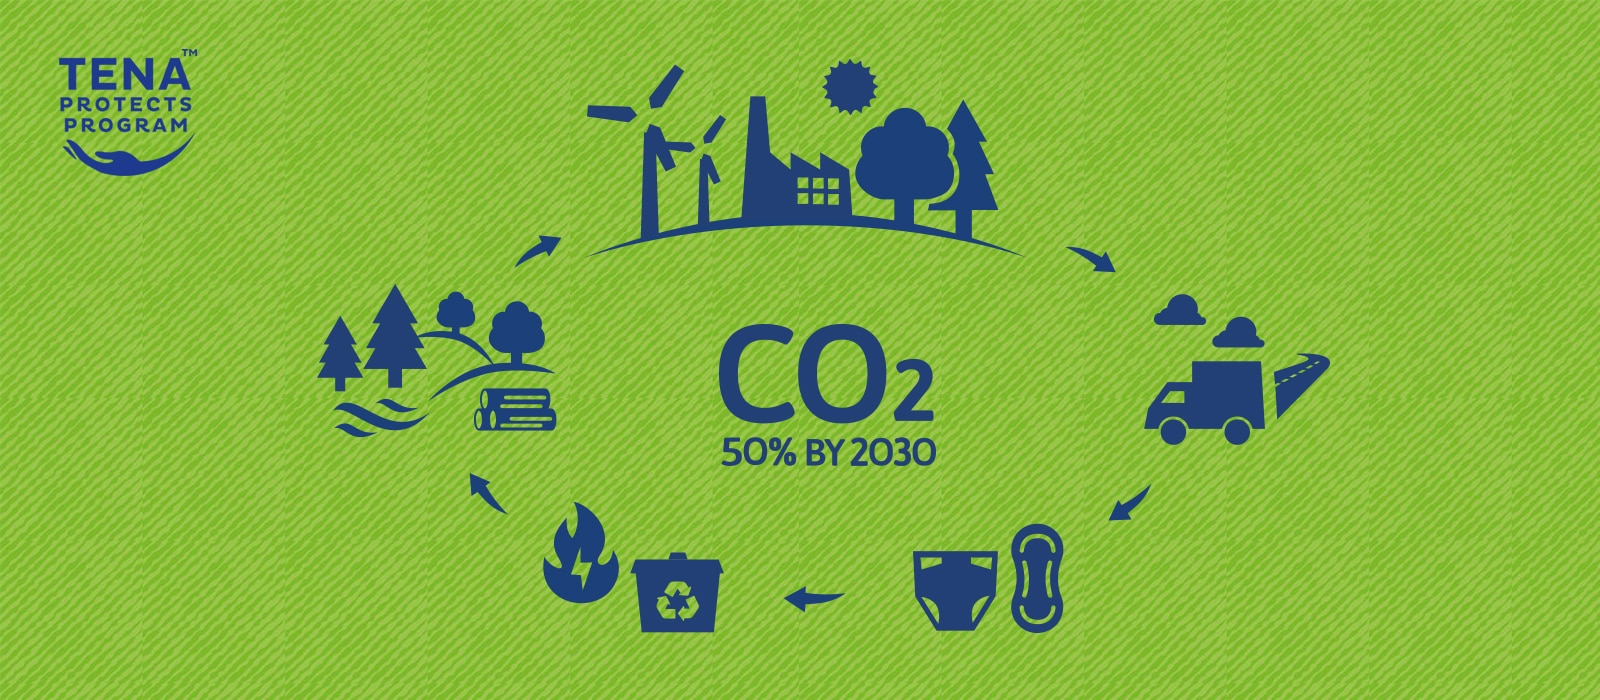 Beside the TENA Protects Program logo, icons for each stage of the product life cycle encircle a text that reads, “CO2 50% by 2030.” 